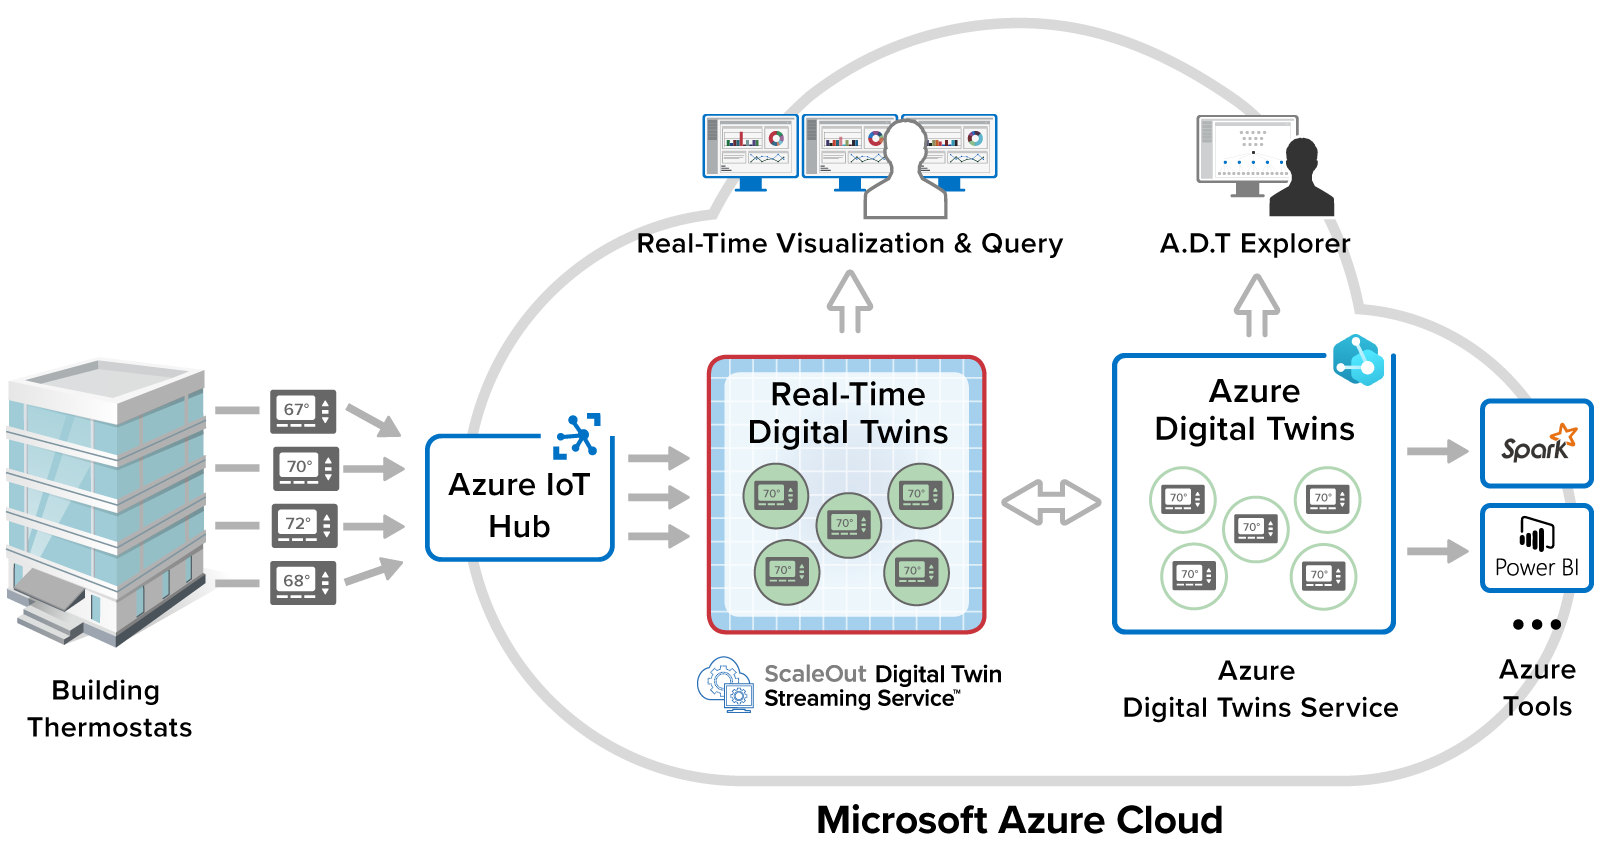 The ScaleOut Azure Digital Twins Integration gives users access to the full range of Azure-based tools, as well as real-time visualization and query.